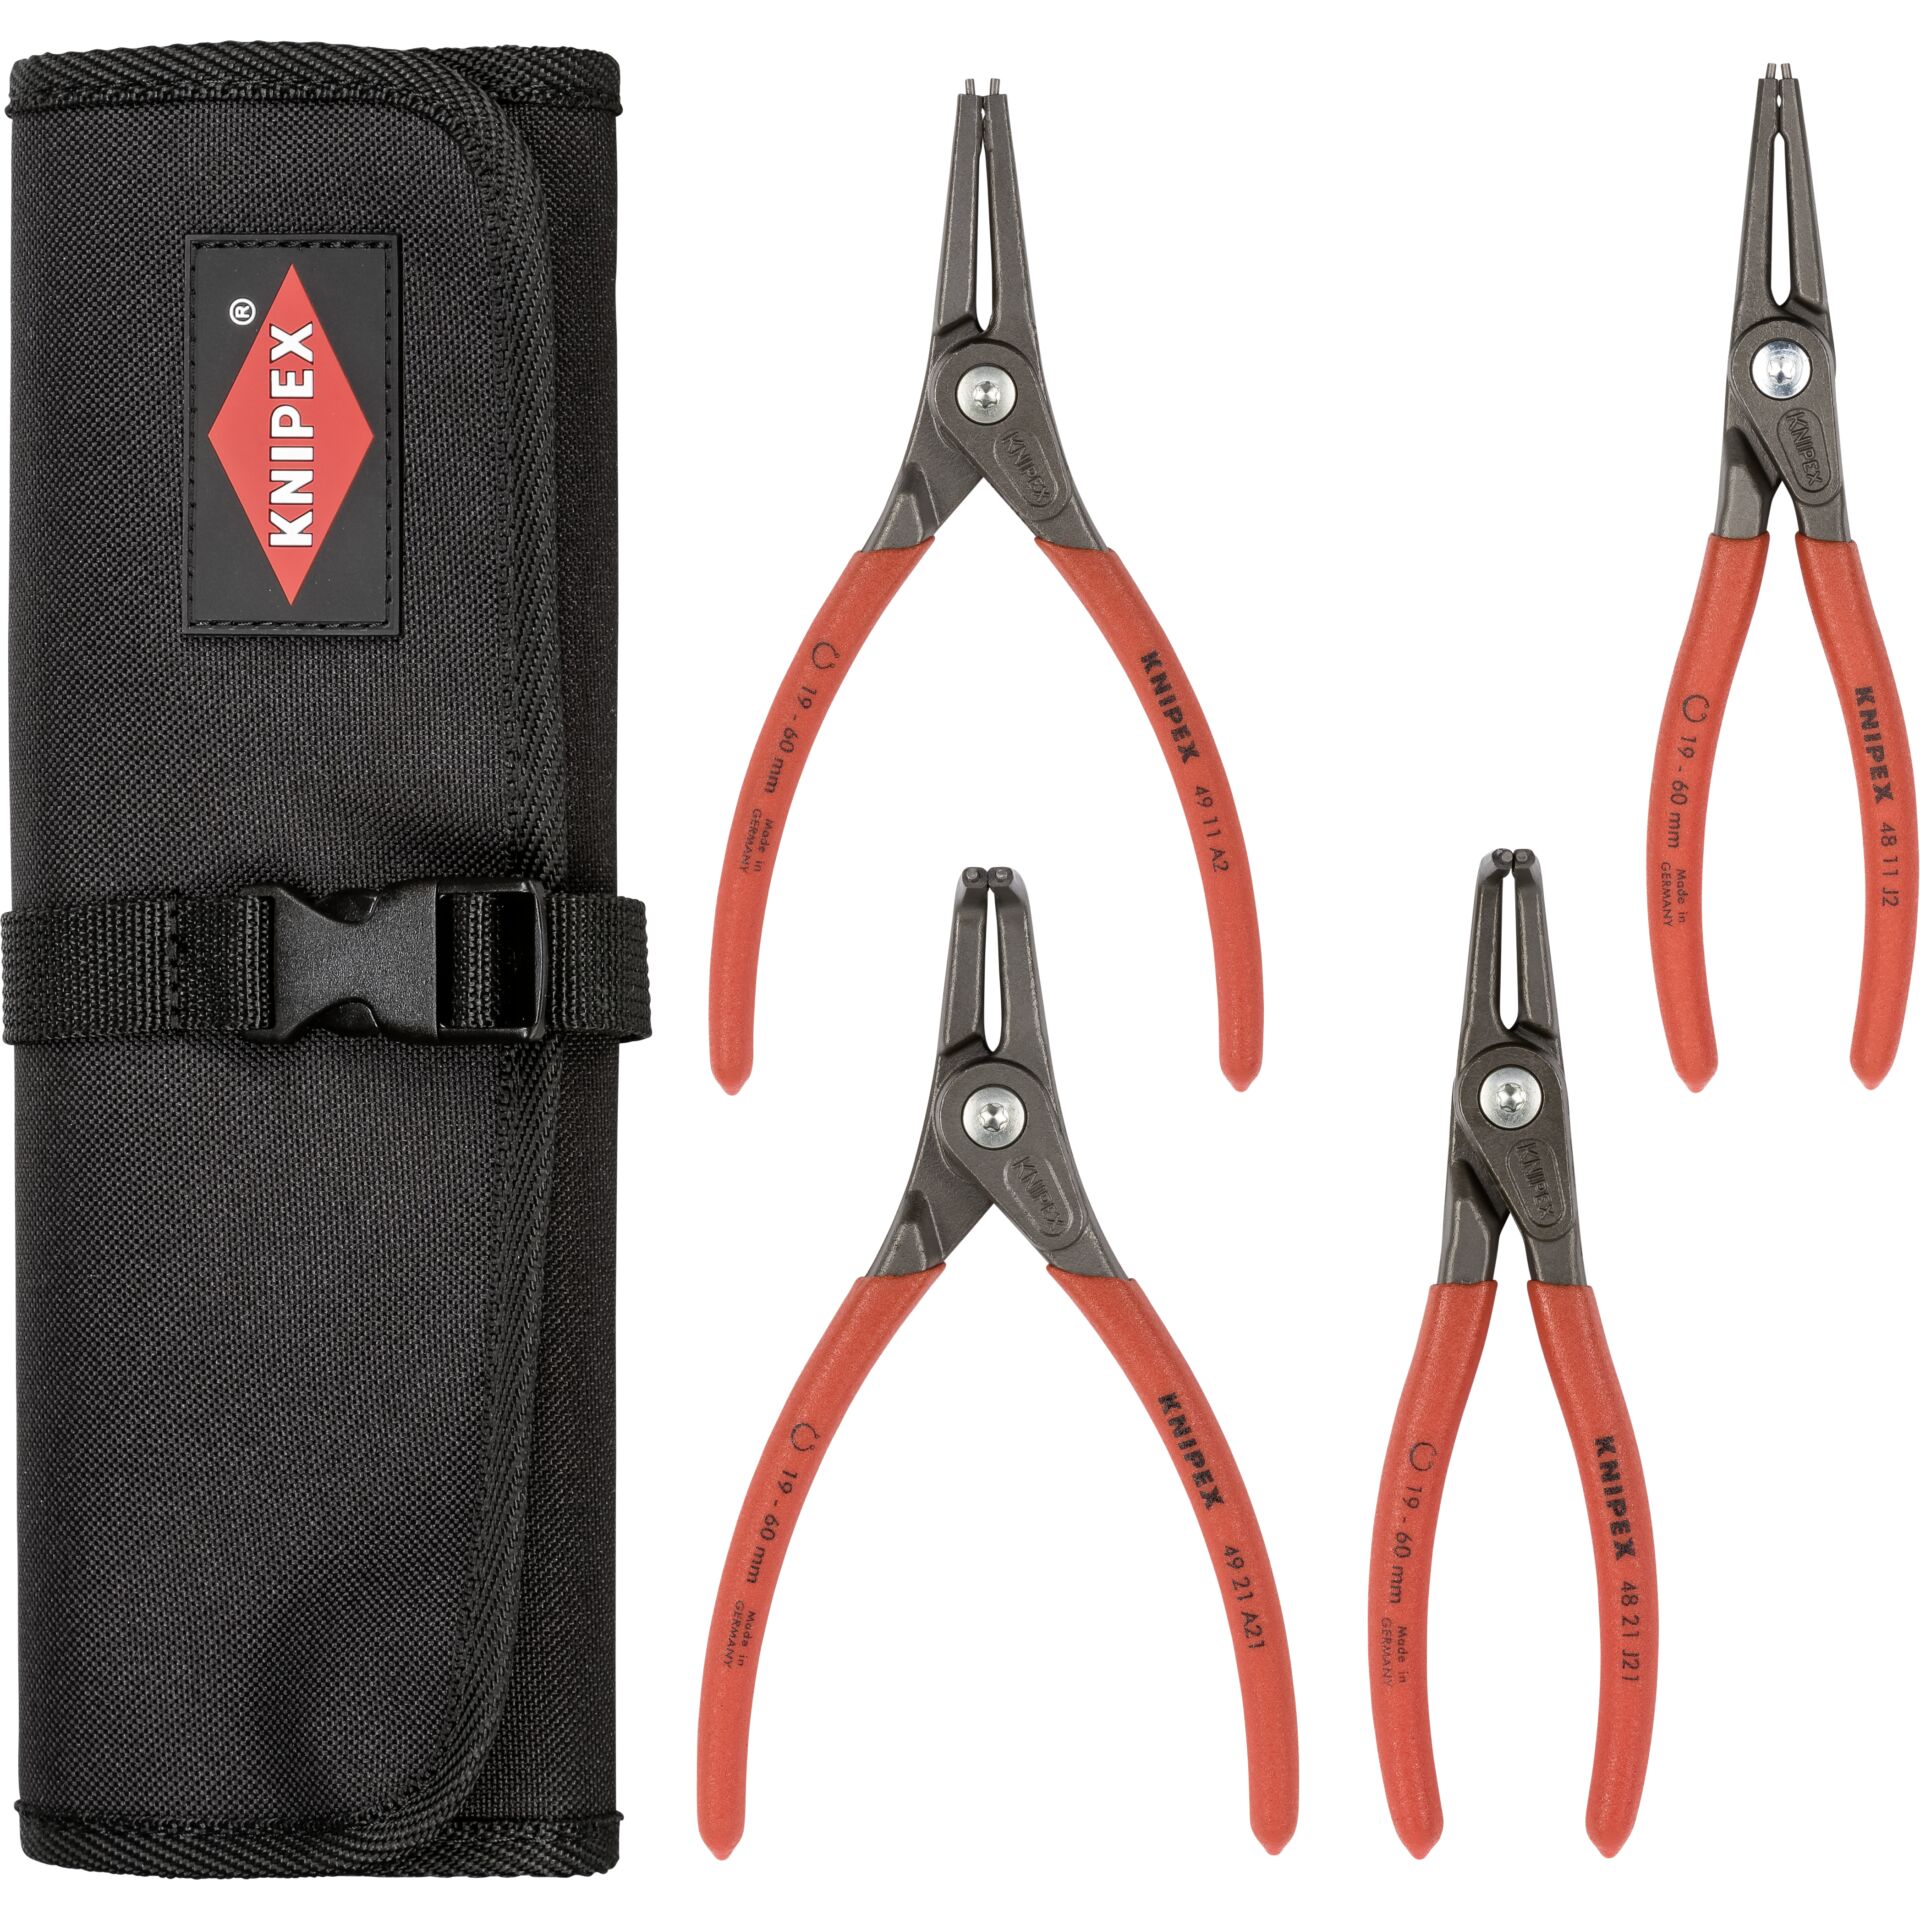 KNIPEX Circlip Pliers Set Case with 4 Pliers